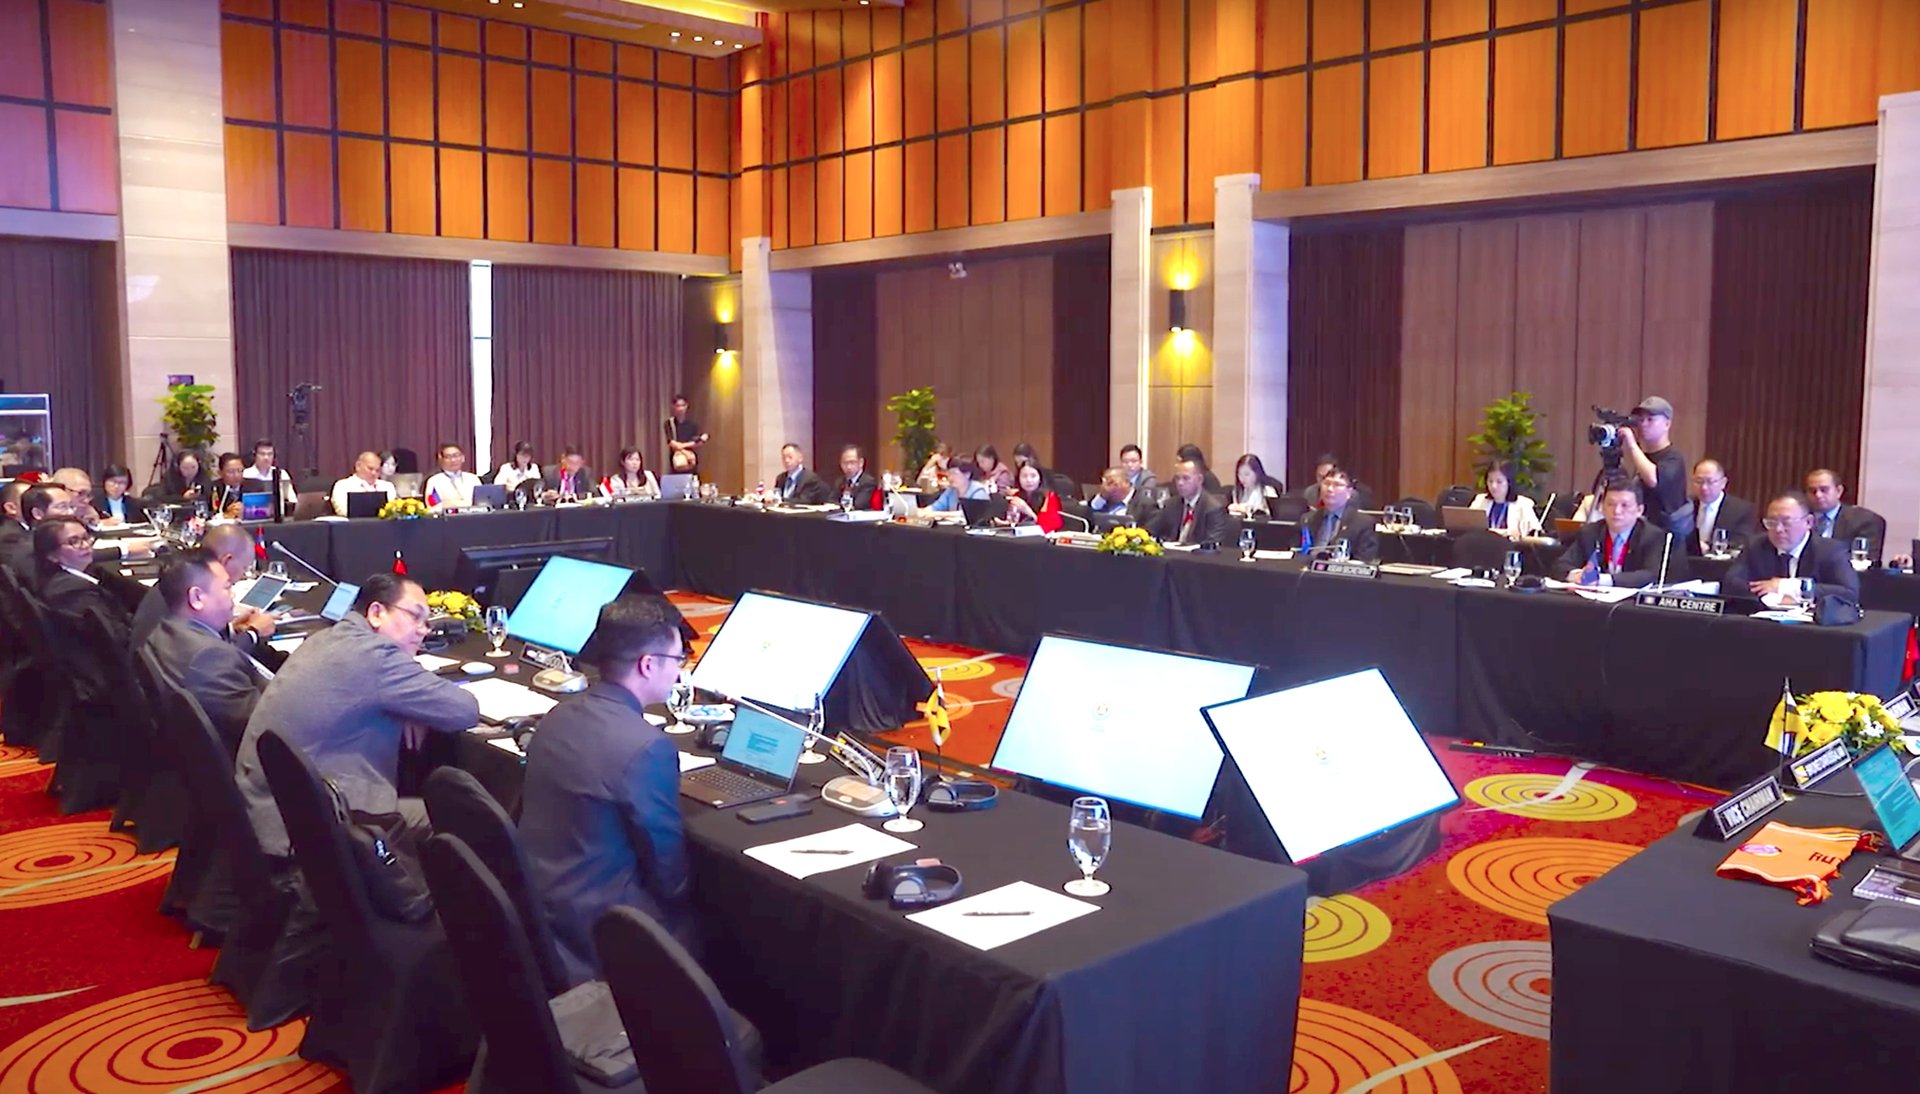 The 42nd ASEAN Committee on Disaster Management and related activities bring up many important topics regarding disaster response and disaster risk reduction. Photo: NH.